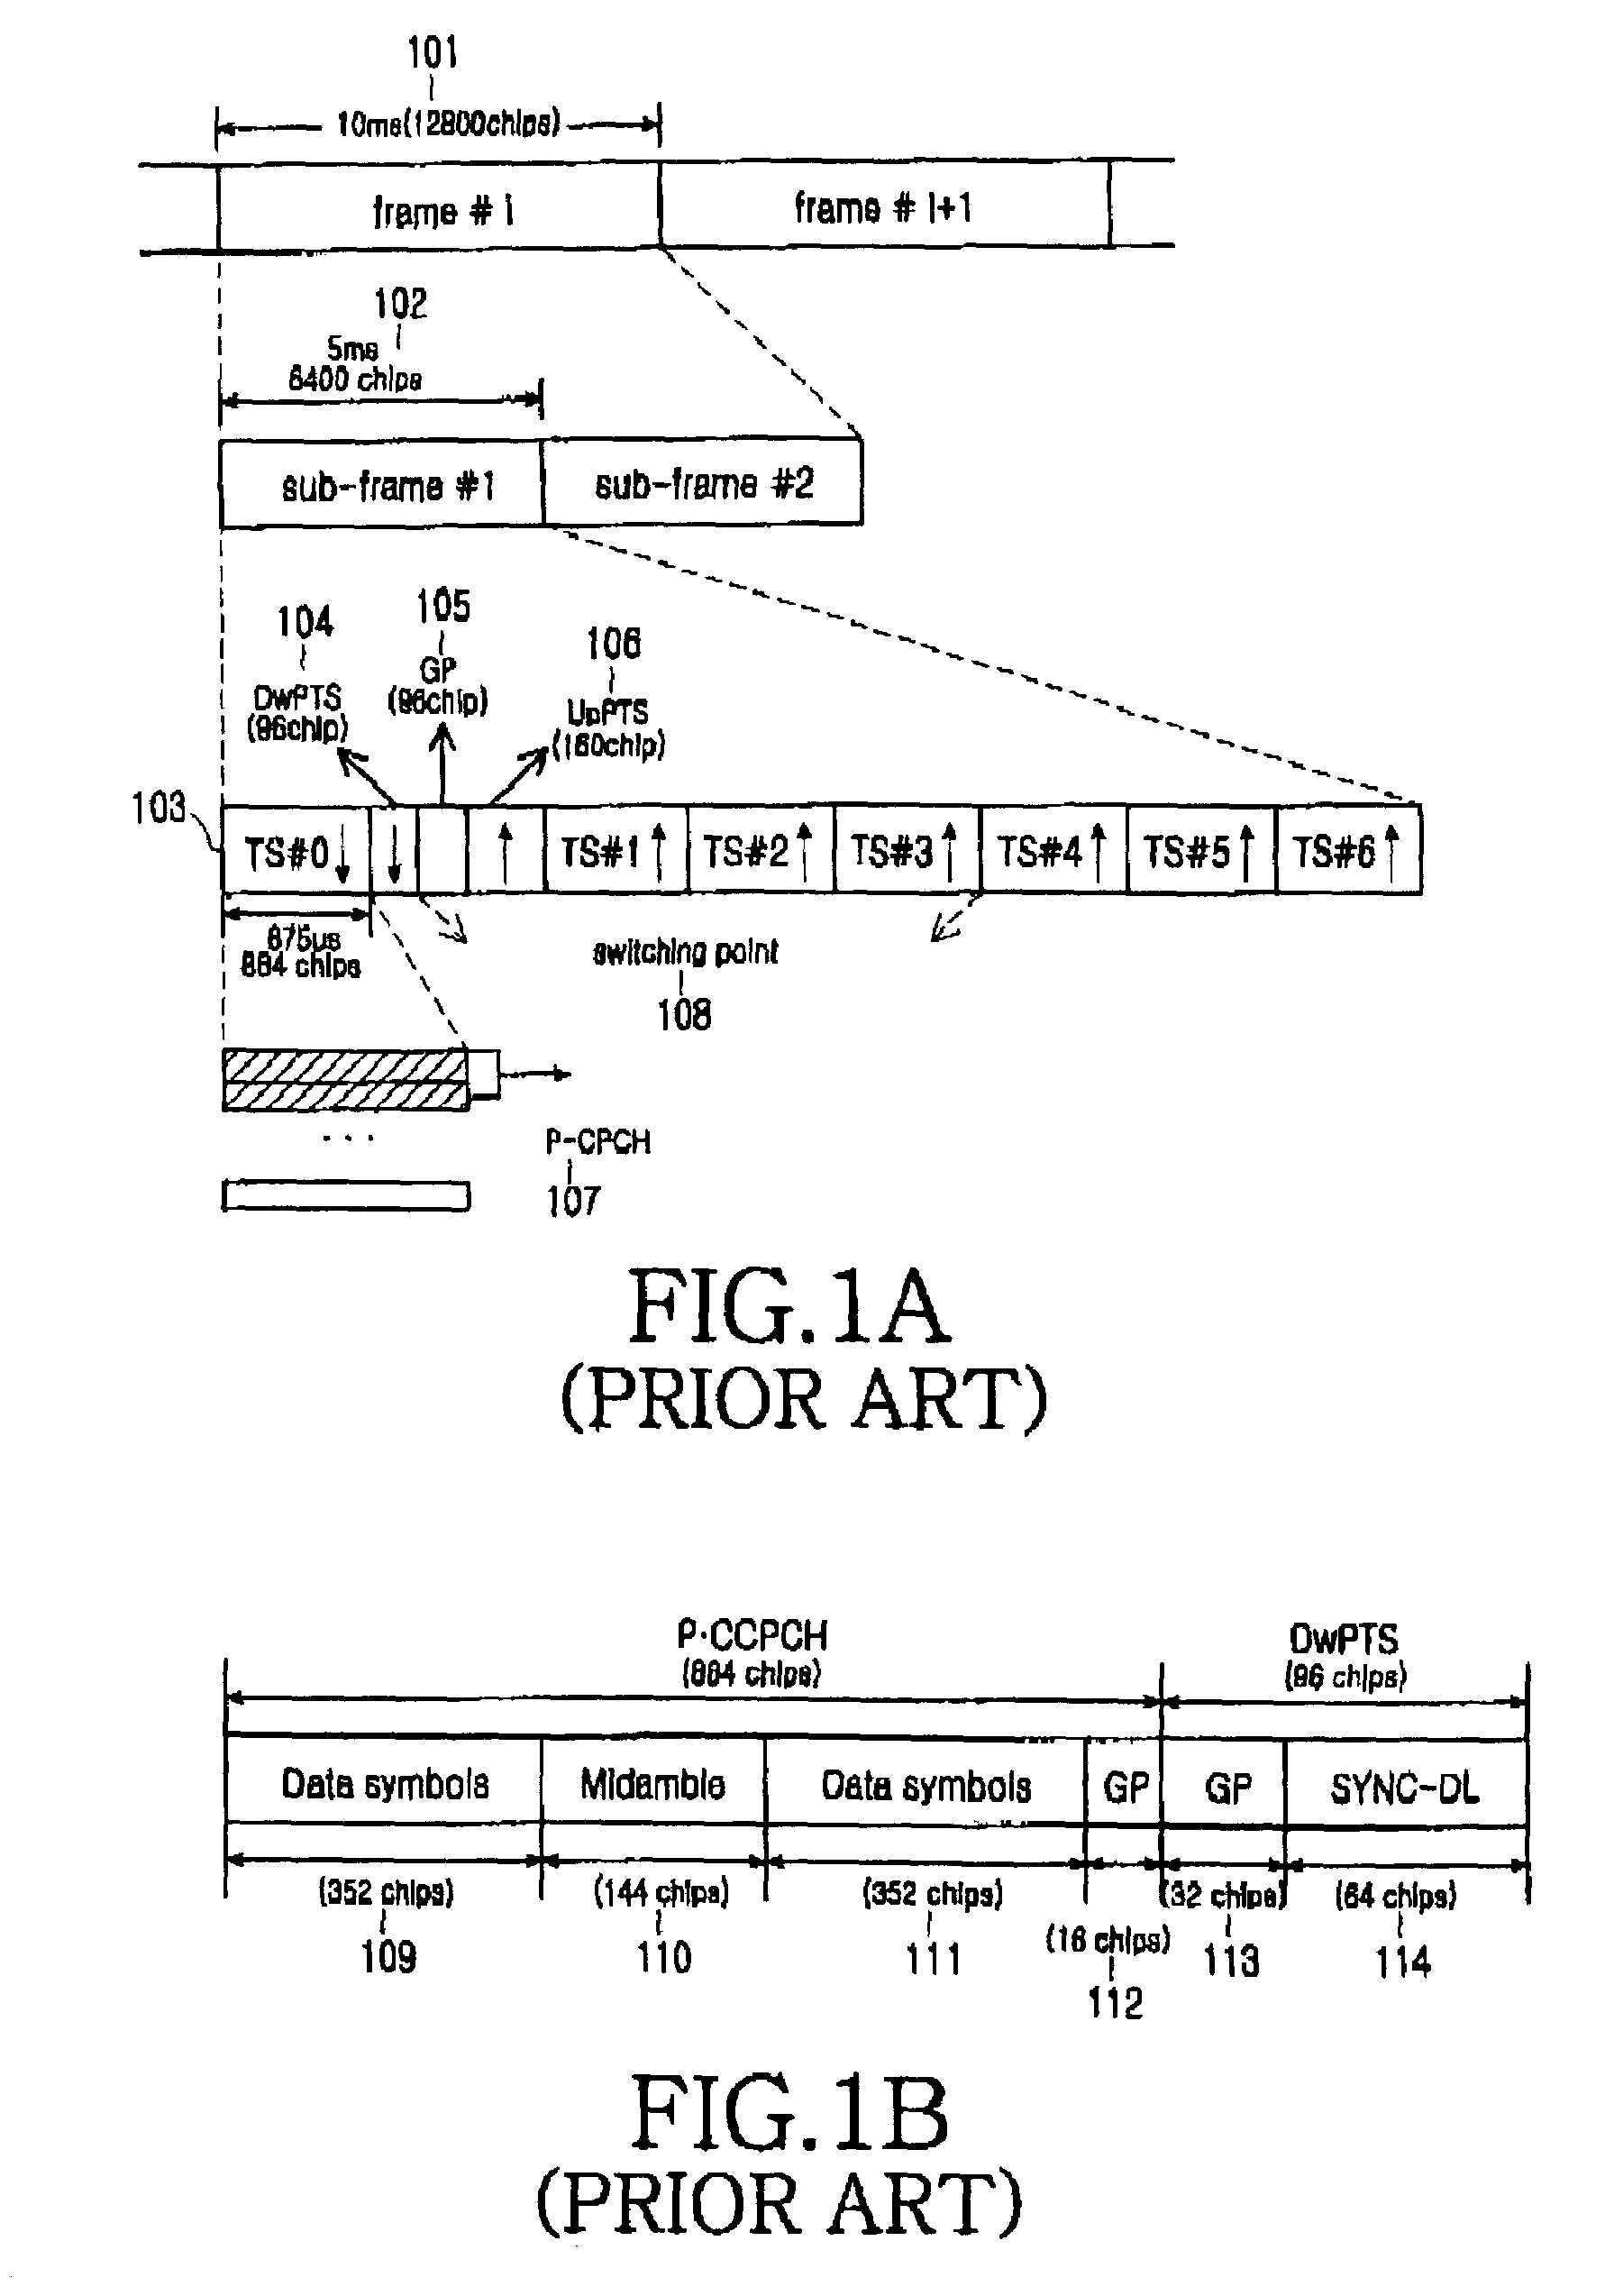 Signal measurement apparatus and method for handover in a mobile communication system